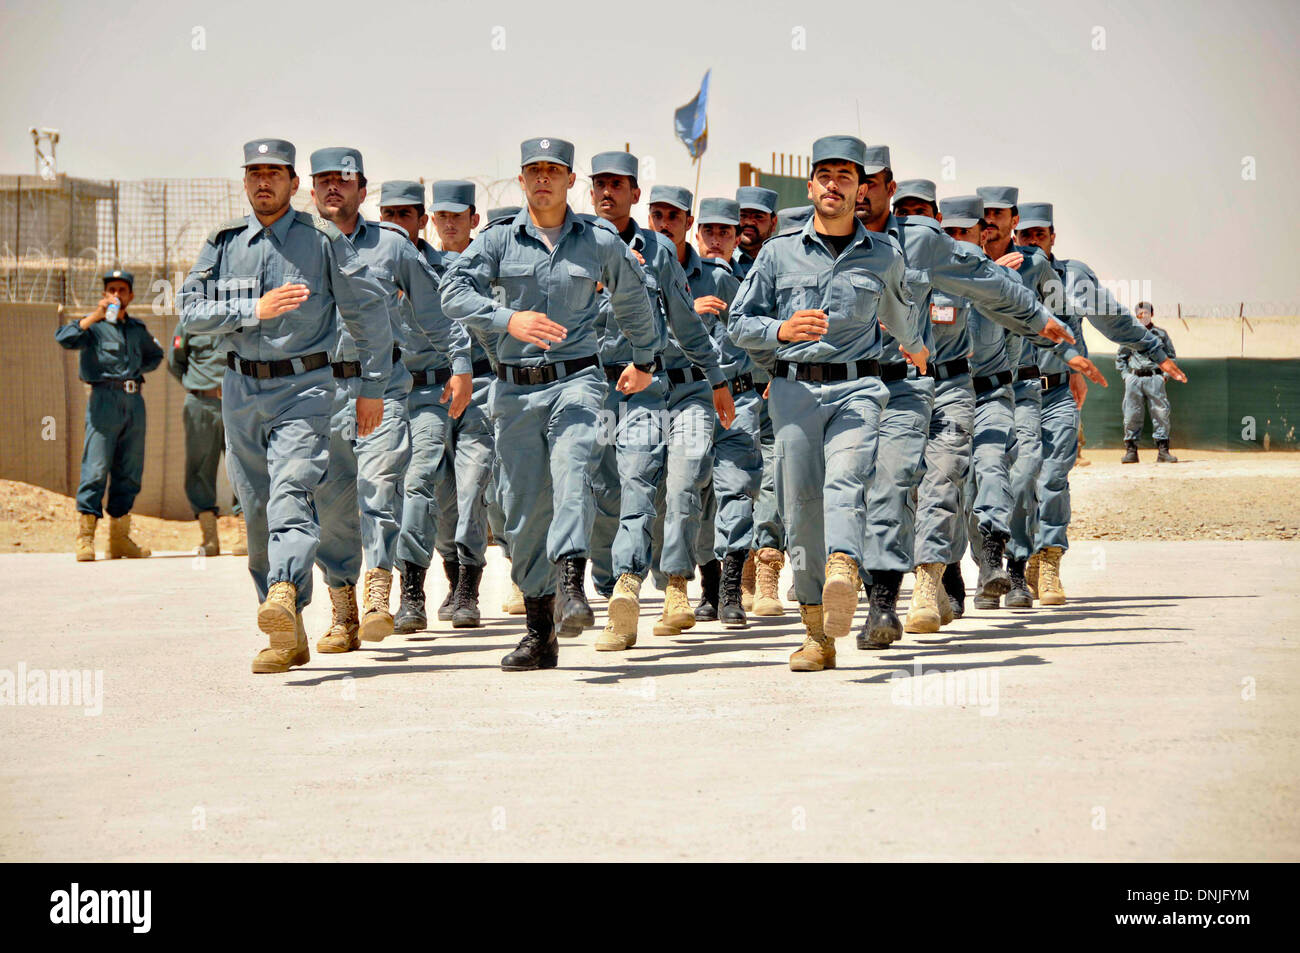 Afghan National Police officers march during an Afghan Local Police graduation ceremony at the regional ALP training center June 6, 2013 in the Lashkar Gah district, Helmand province, Afghanistan. Stock Photo